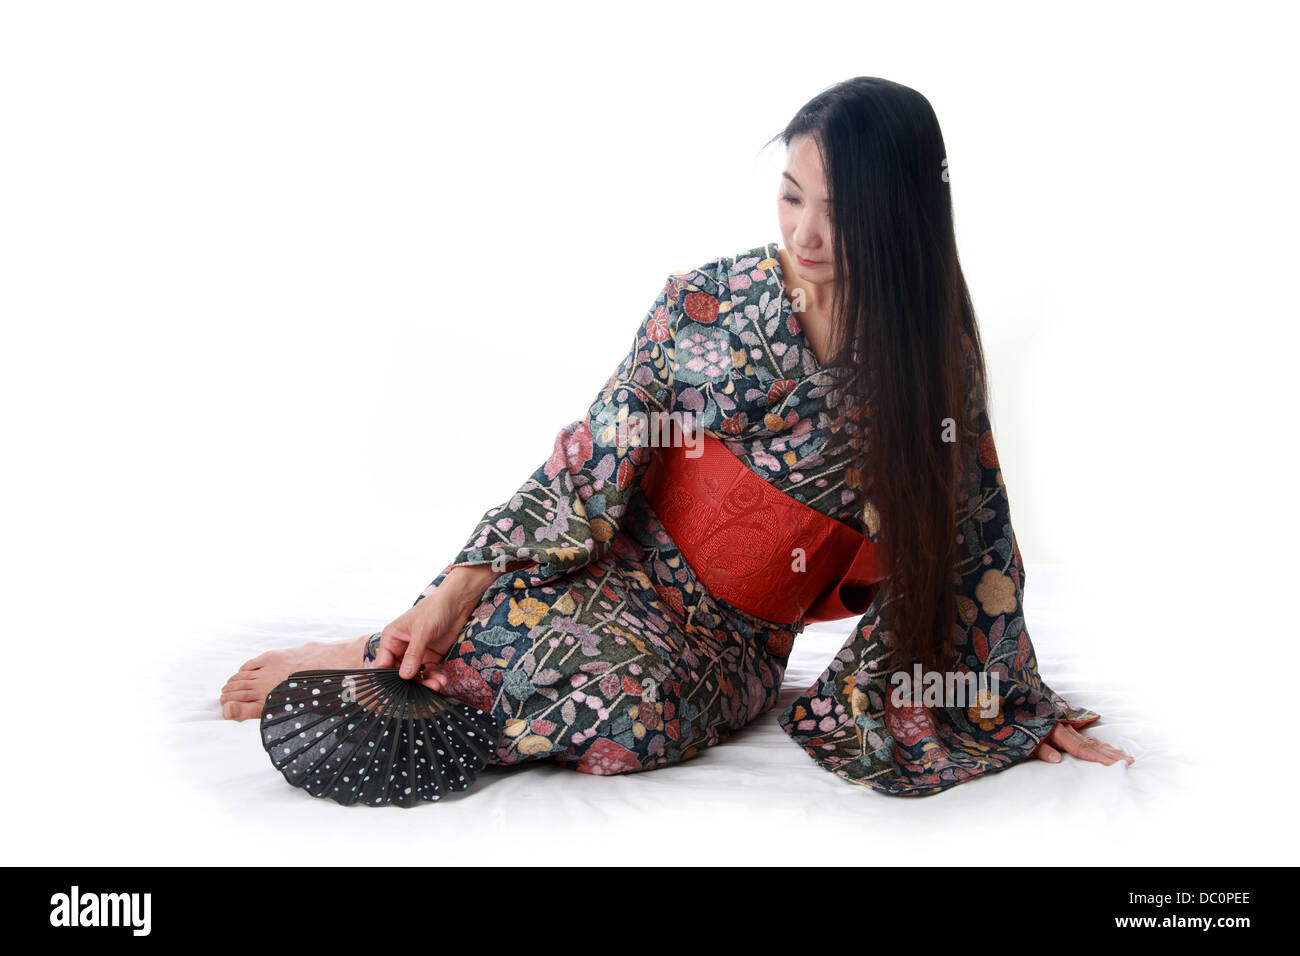 Japanese Lady Sitting on the Floor Wearing a Traditional Blue and Red Patterned Kimono and Holding a Fan Stock Photo